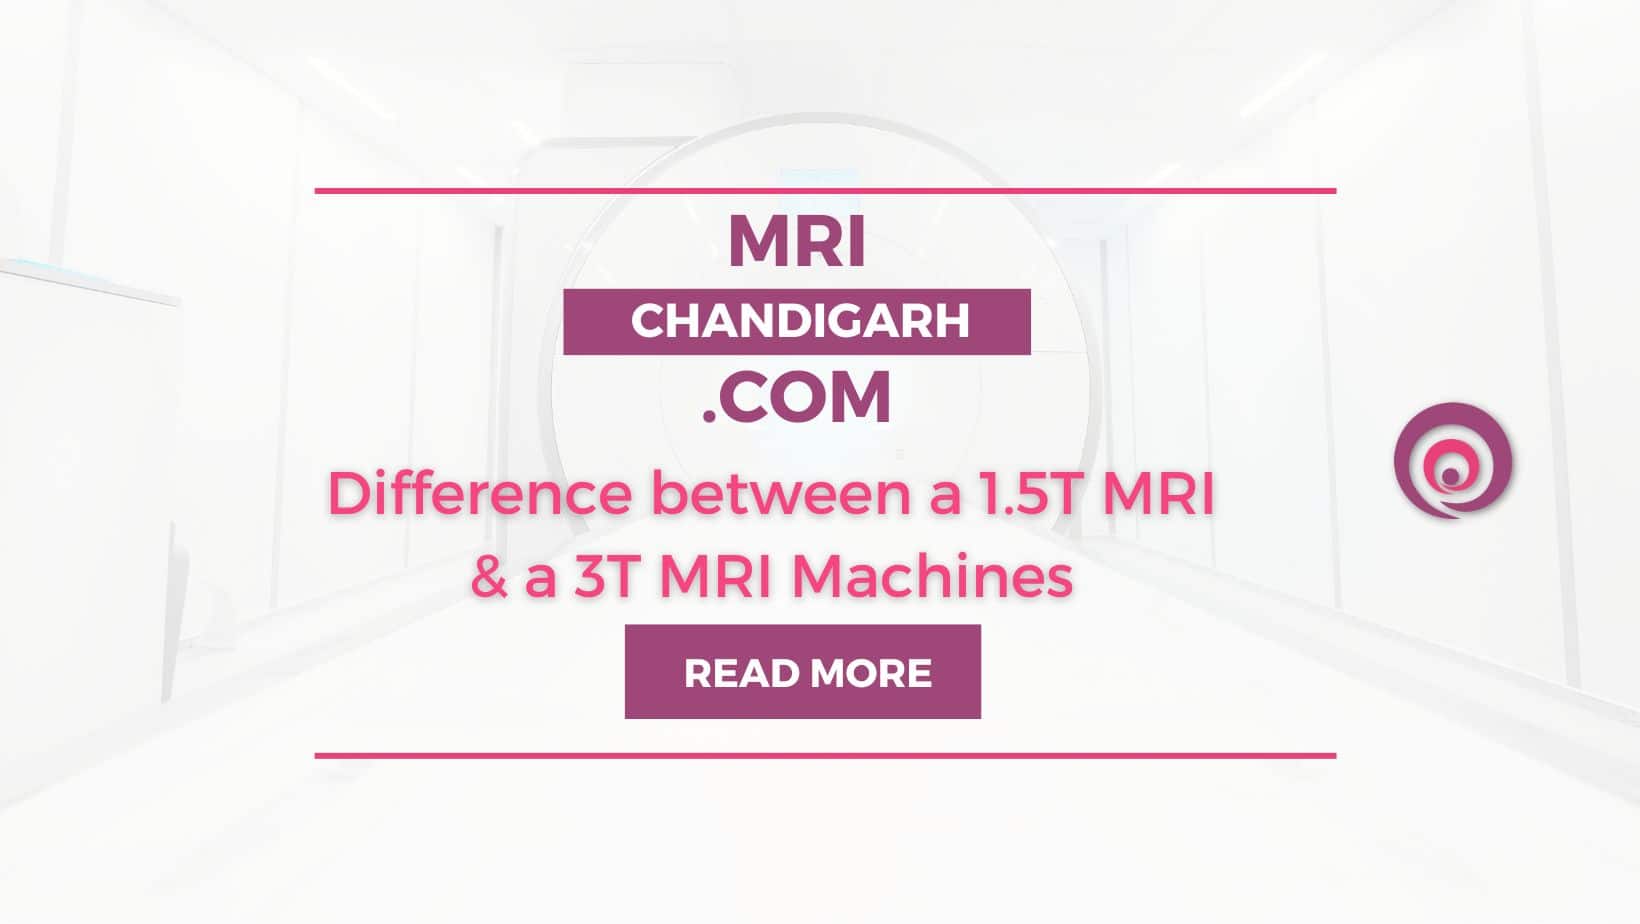 Difference between a 1.5T MRI & a 3T MRI Machines